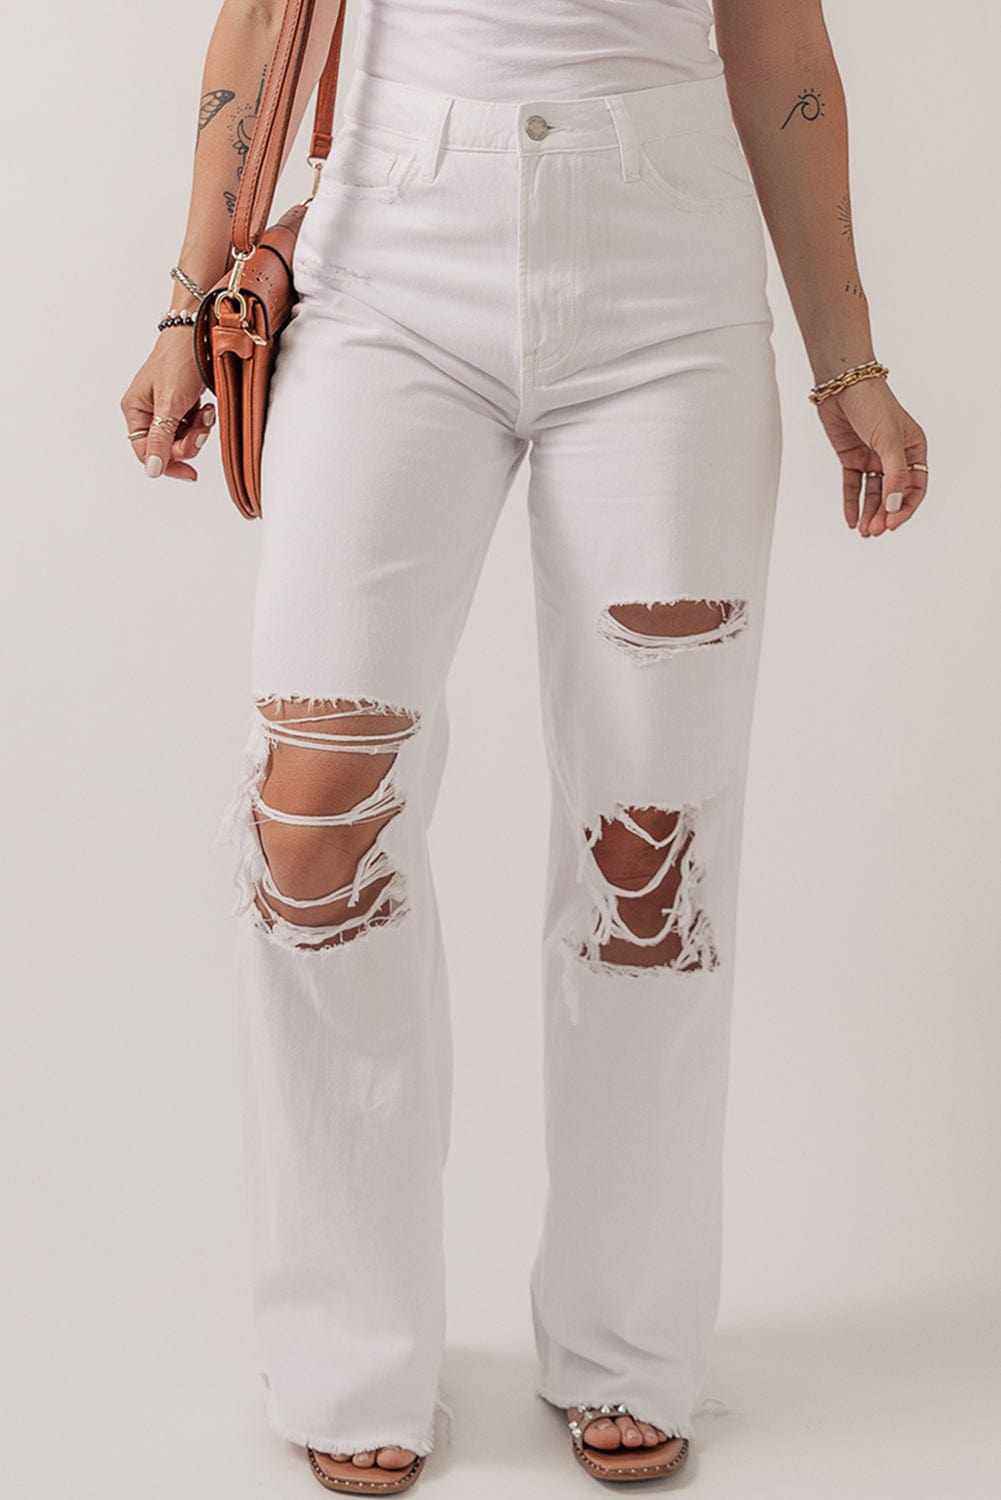 The802Gypsy  pants Bright White / 6 / 98%Cotton+2%Elastane TRAVELING GYPSY-Heavy Distressed Straight Leg Jeans